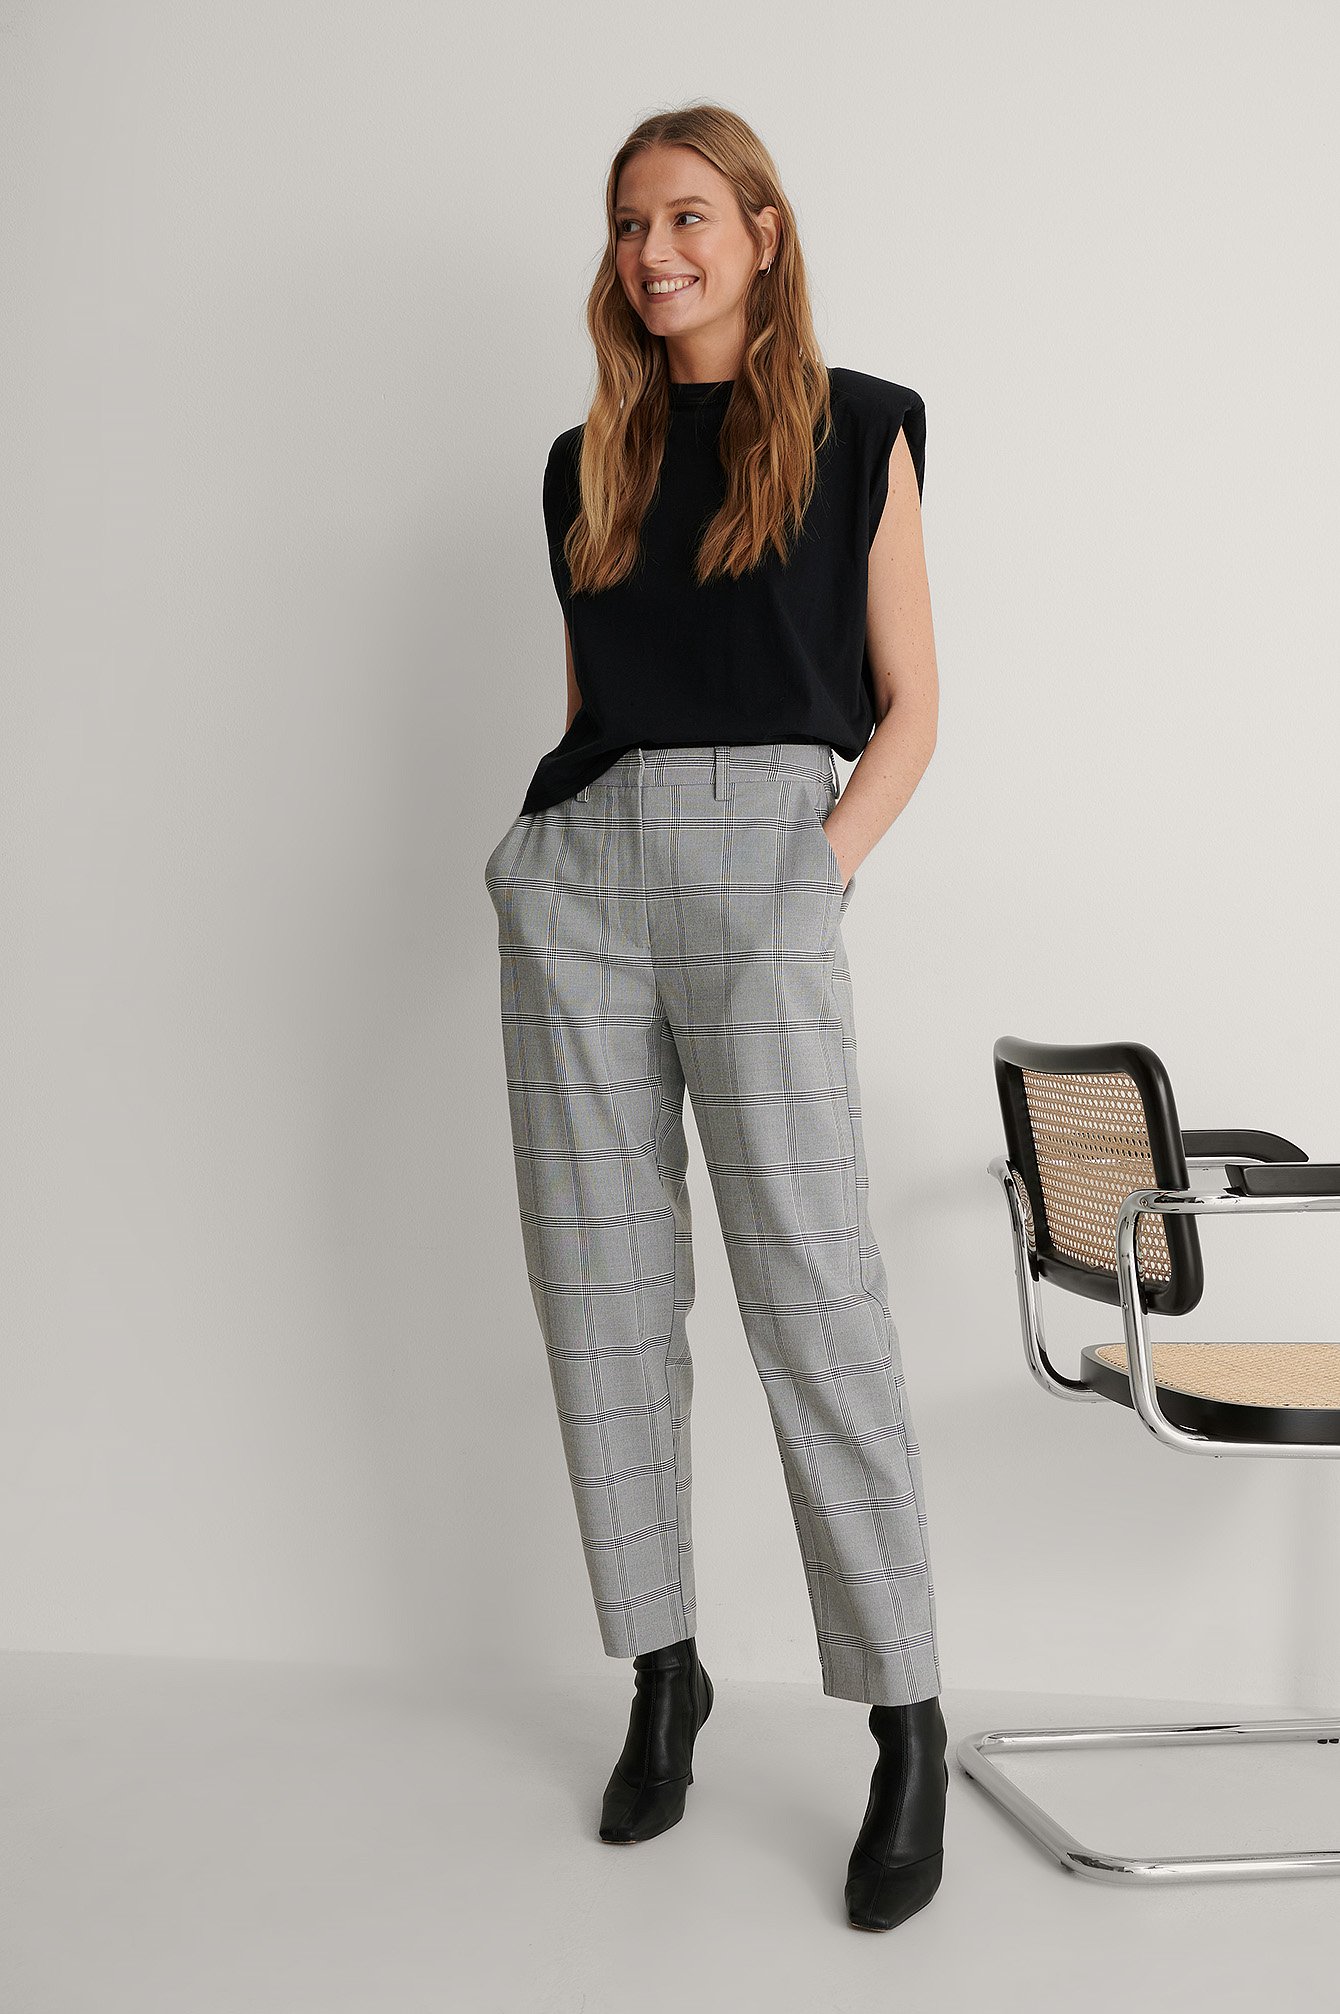 Checkered Pants Outfit.